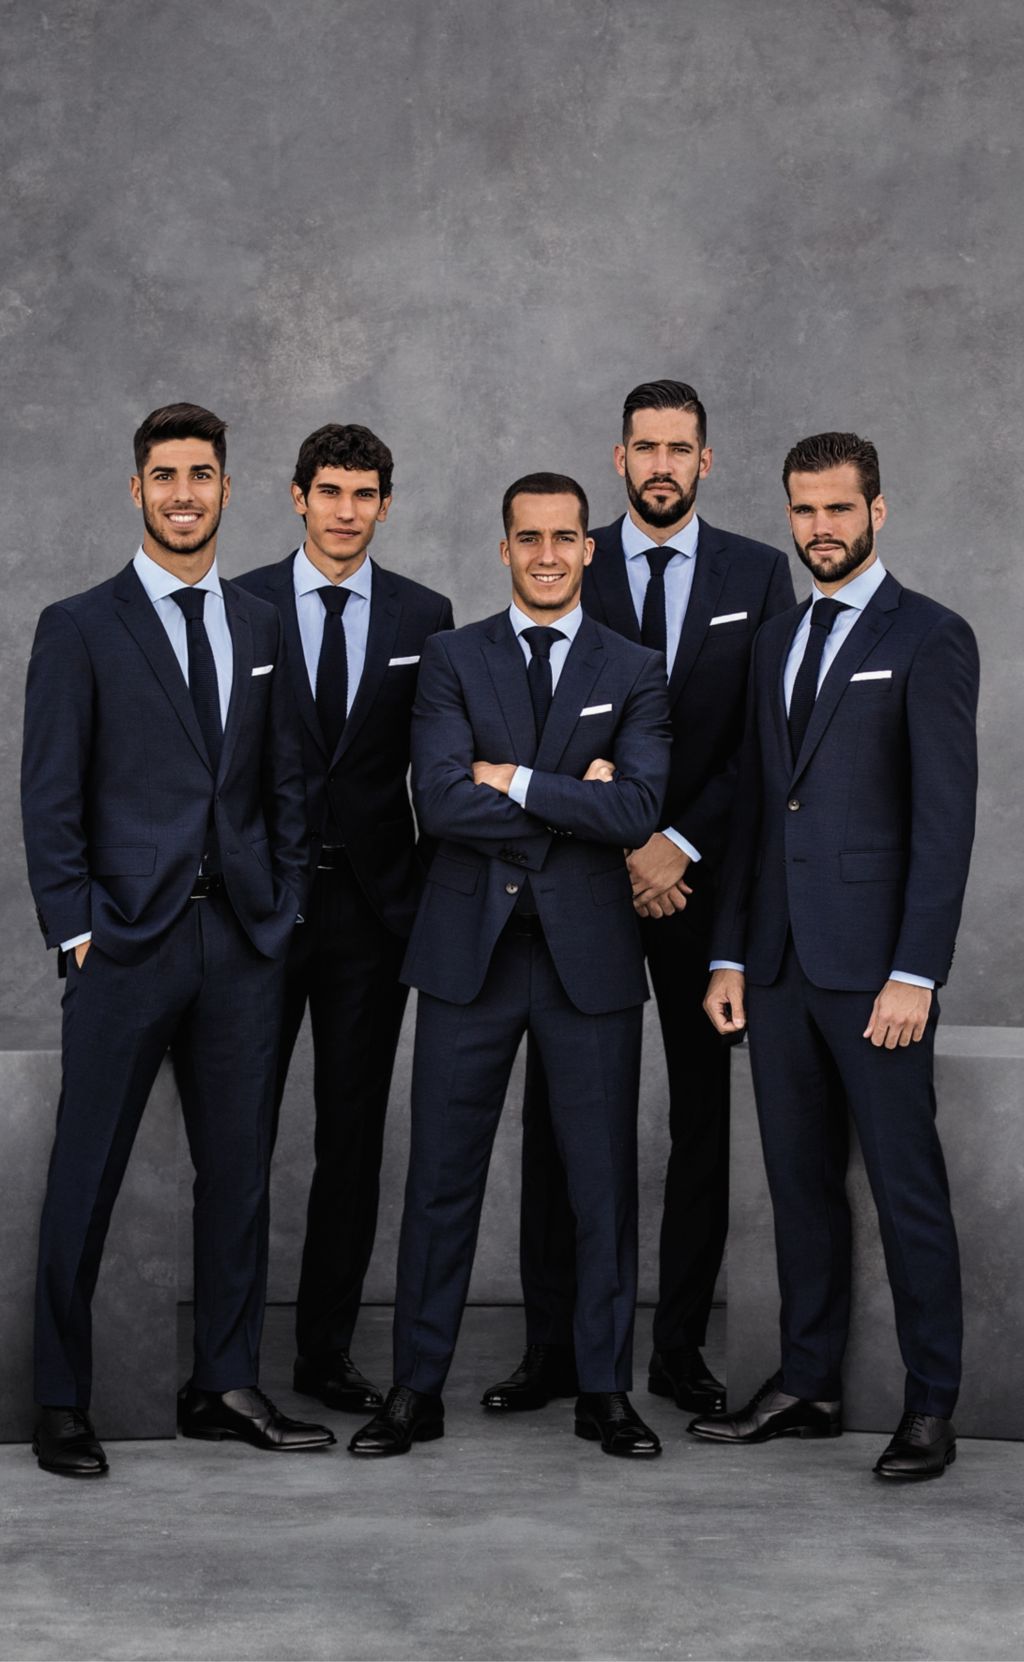 Real Madrid C. F. - Players wearing BOSS | Suits & casual looks